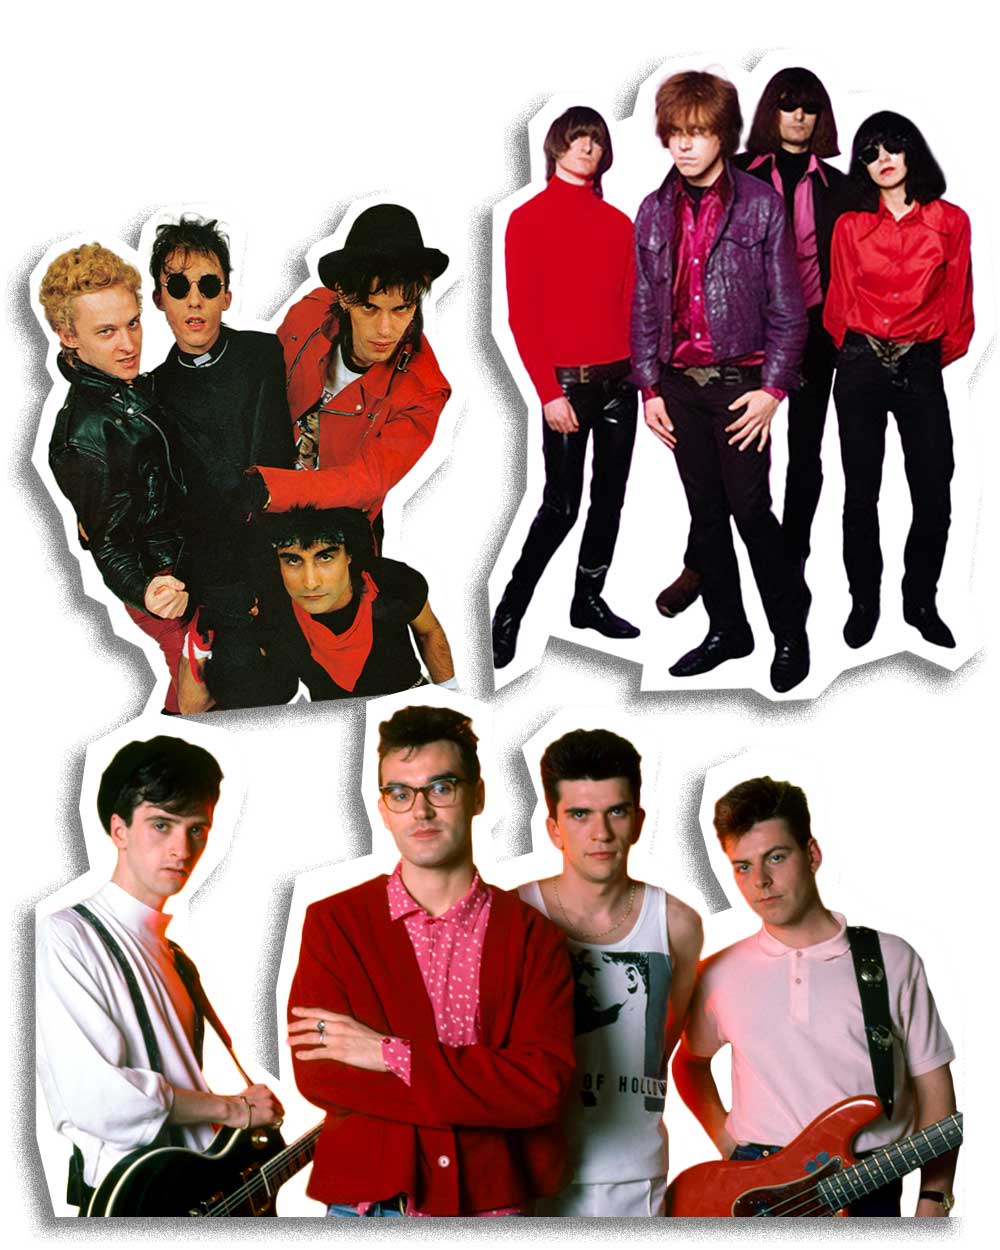 Post-Punk style in 80s rock fashion